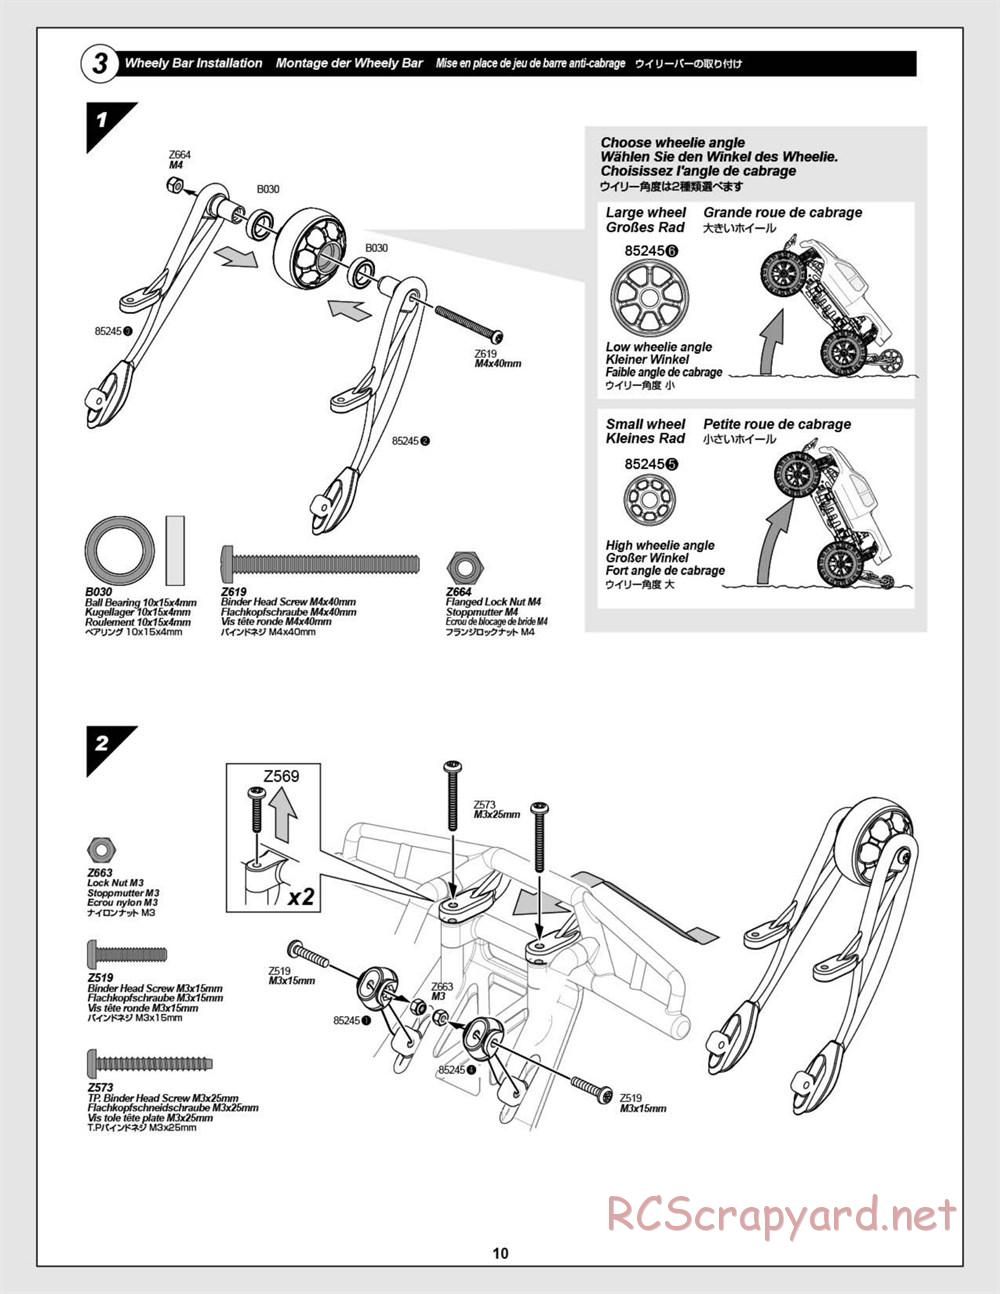 HPI - Savage Flux HP - Manual - Page 10